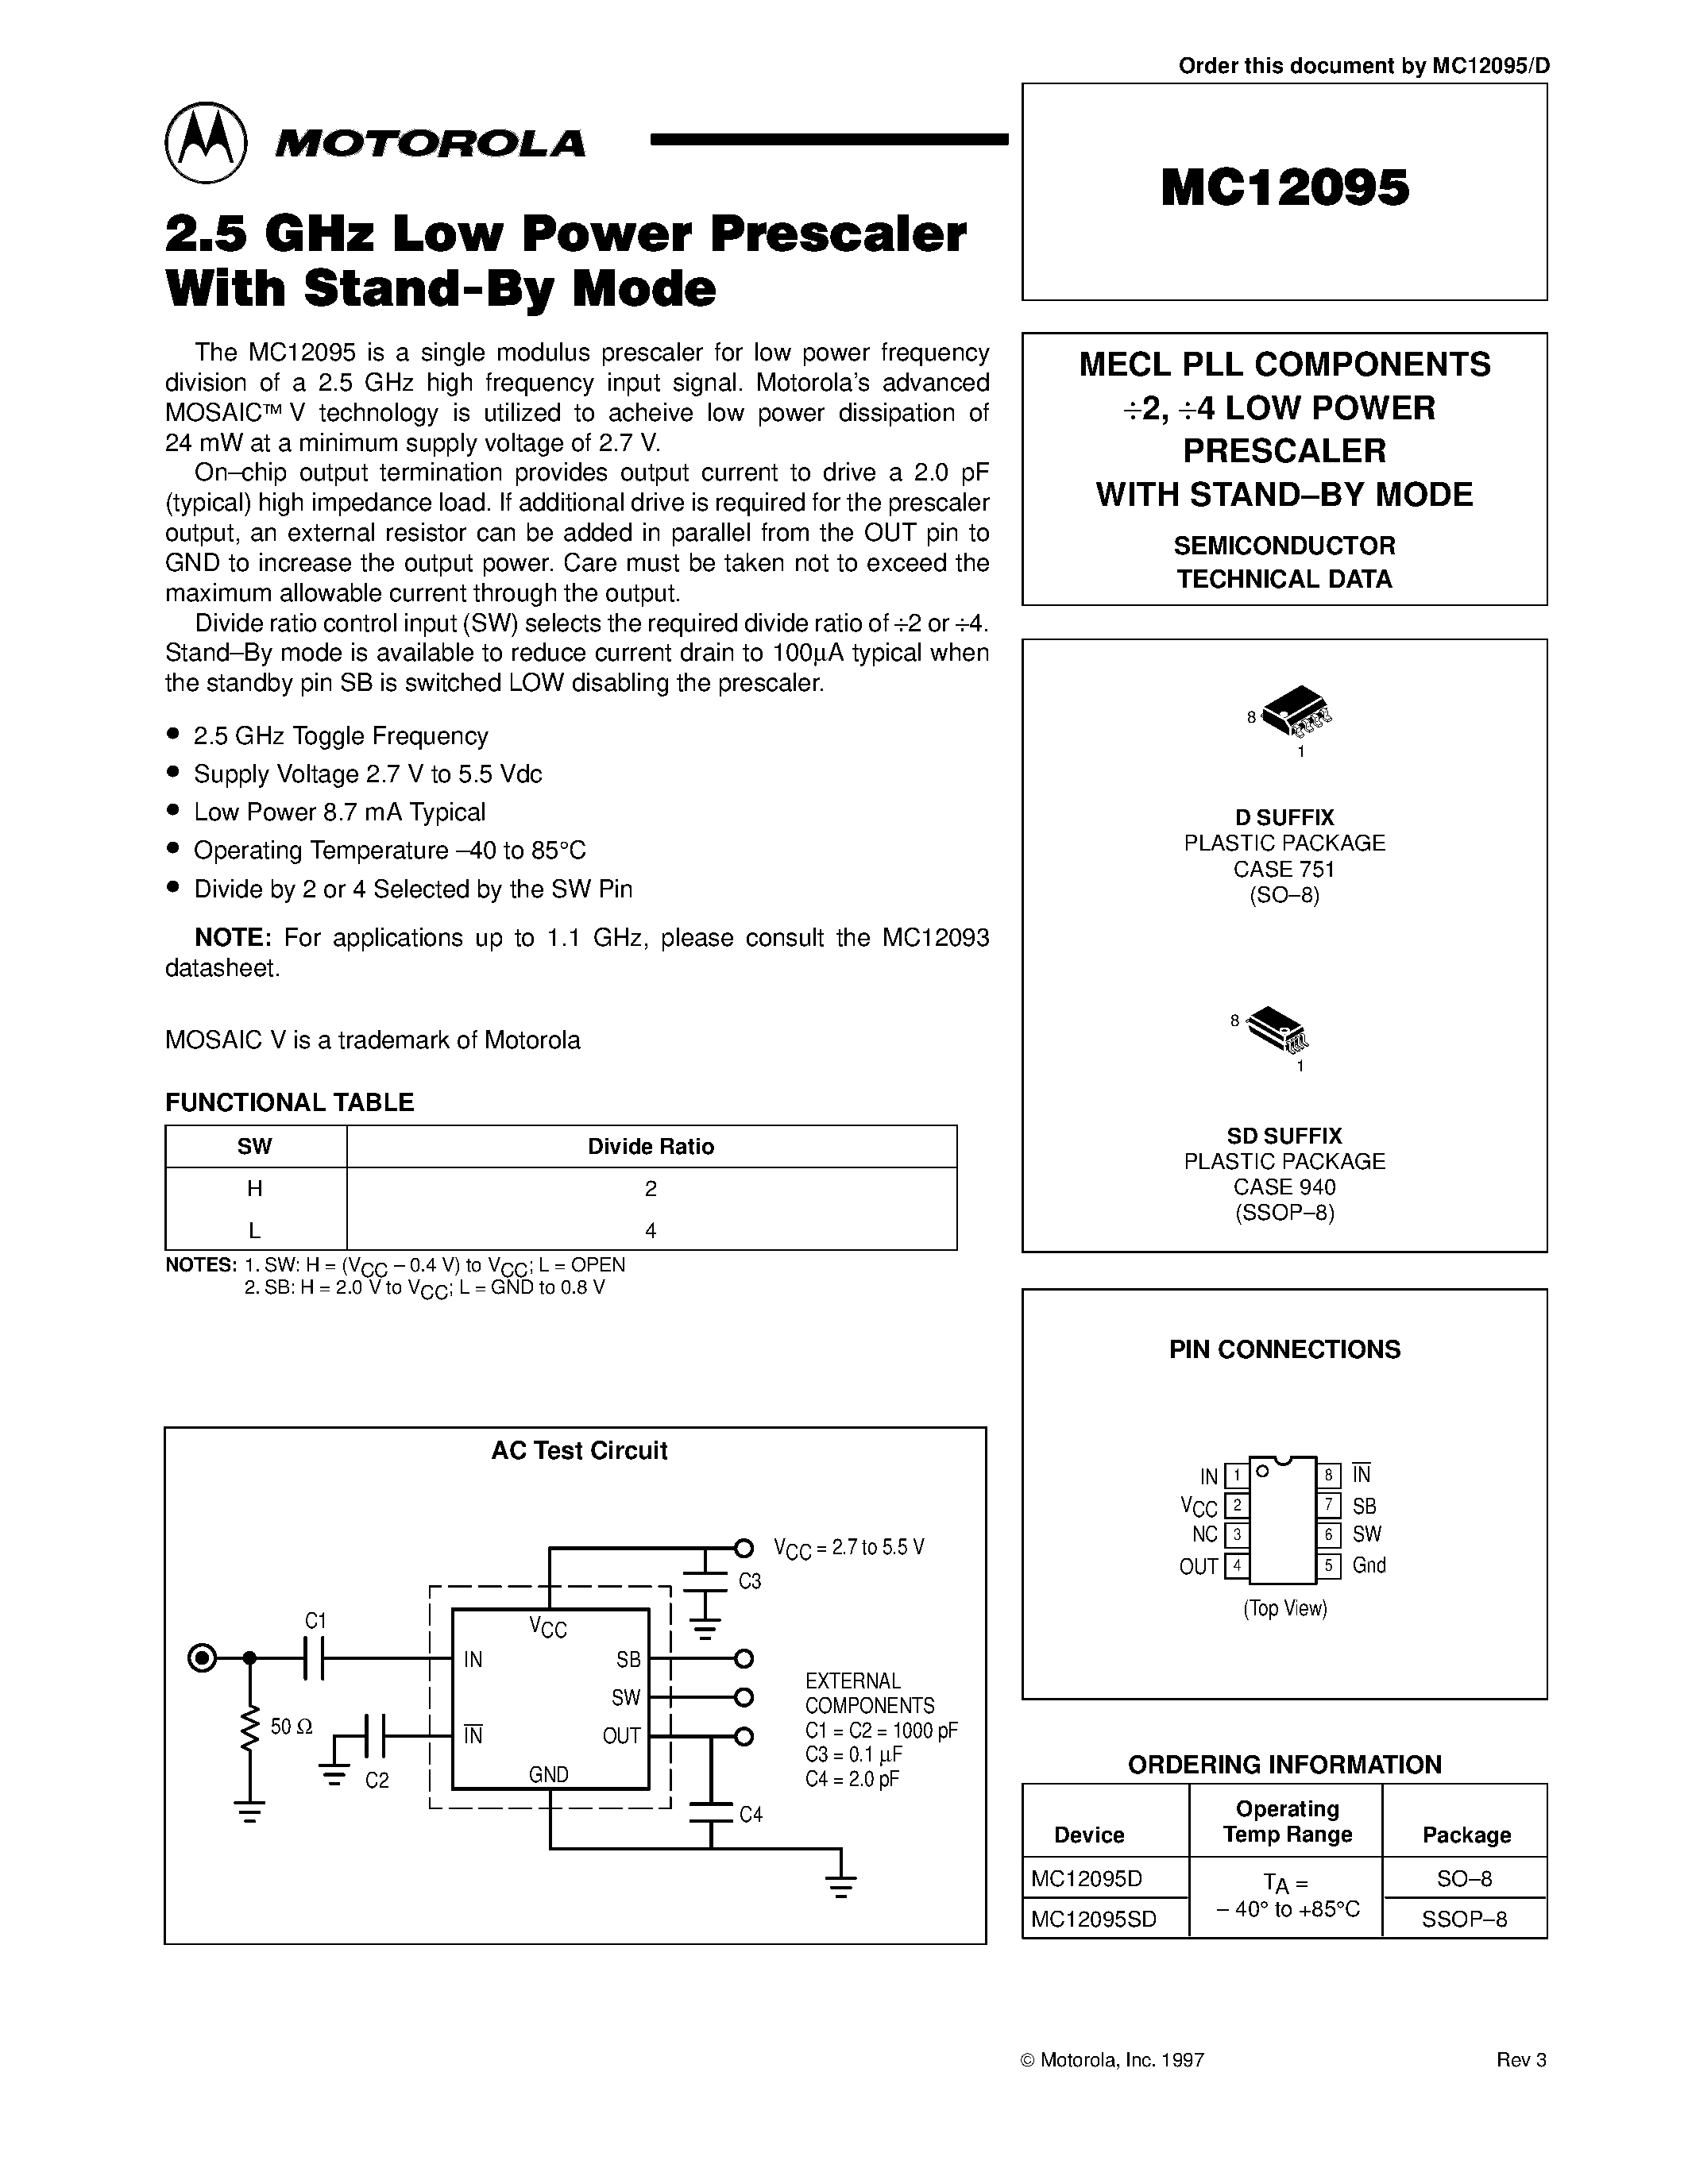 Datasheet MC12095SD - MECL PLL COMPONENTS 2 / 4 LOW POWER PRESCALER WITH STAND-BY MODE page 1